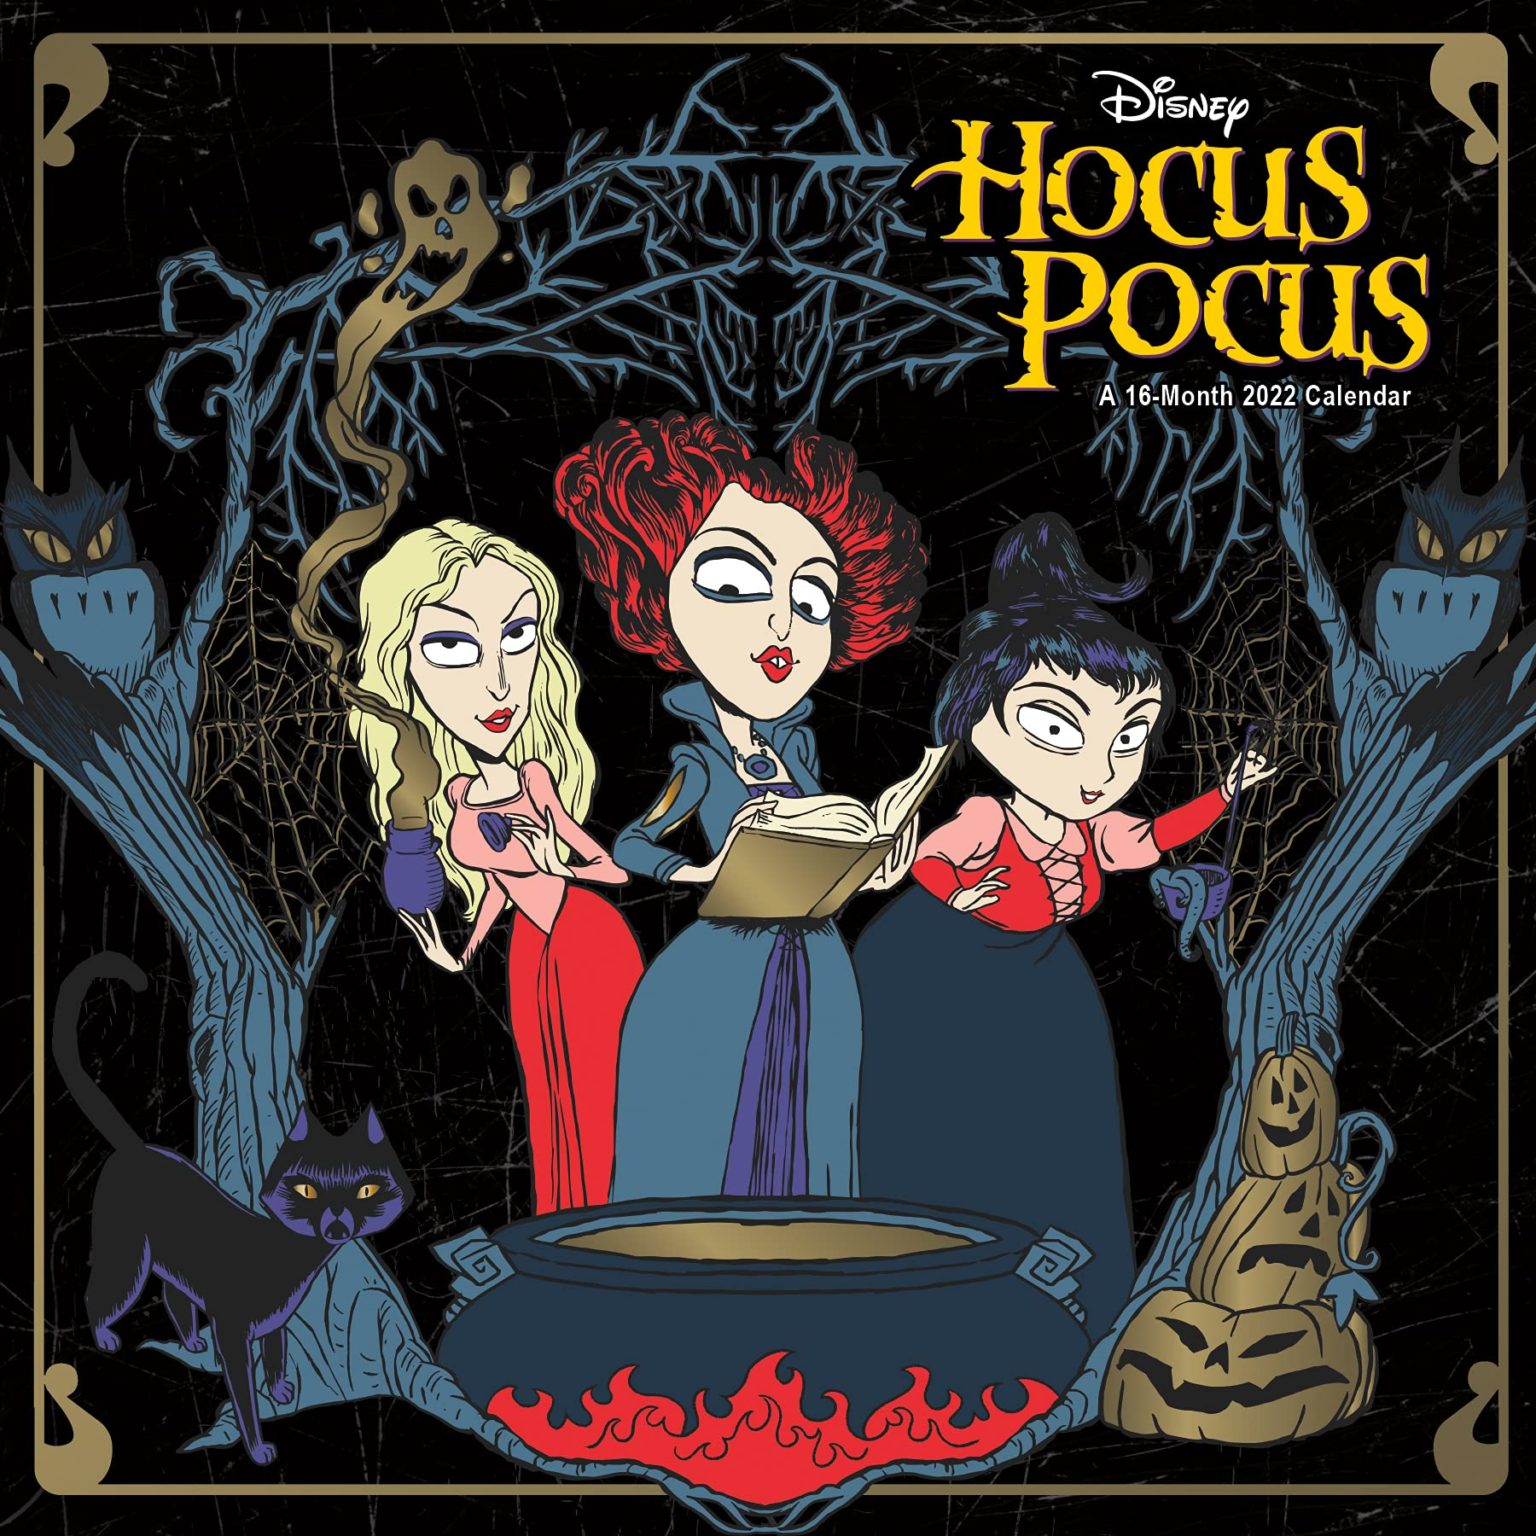 You can now buy a #39 Hocus Pocus #39 wall calendar to show your love for the